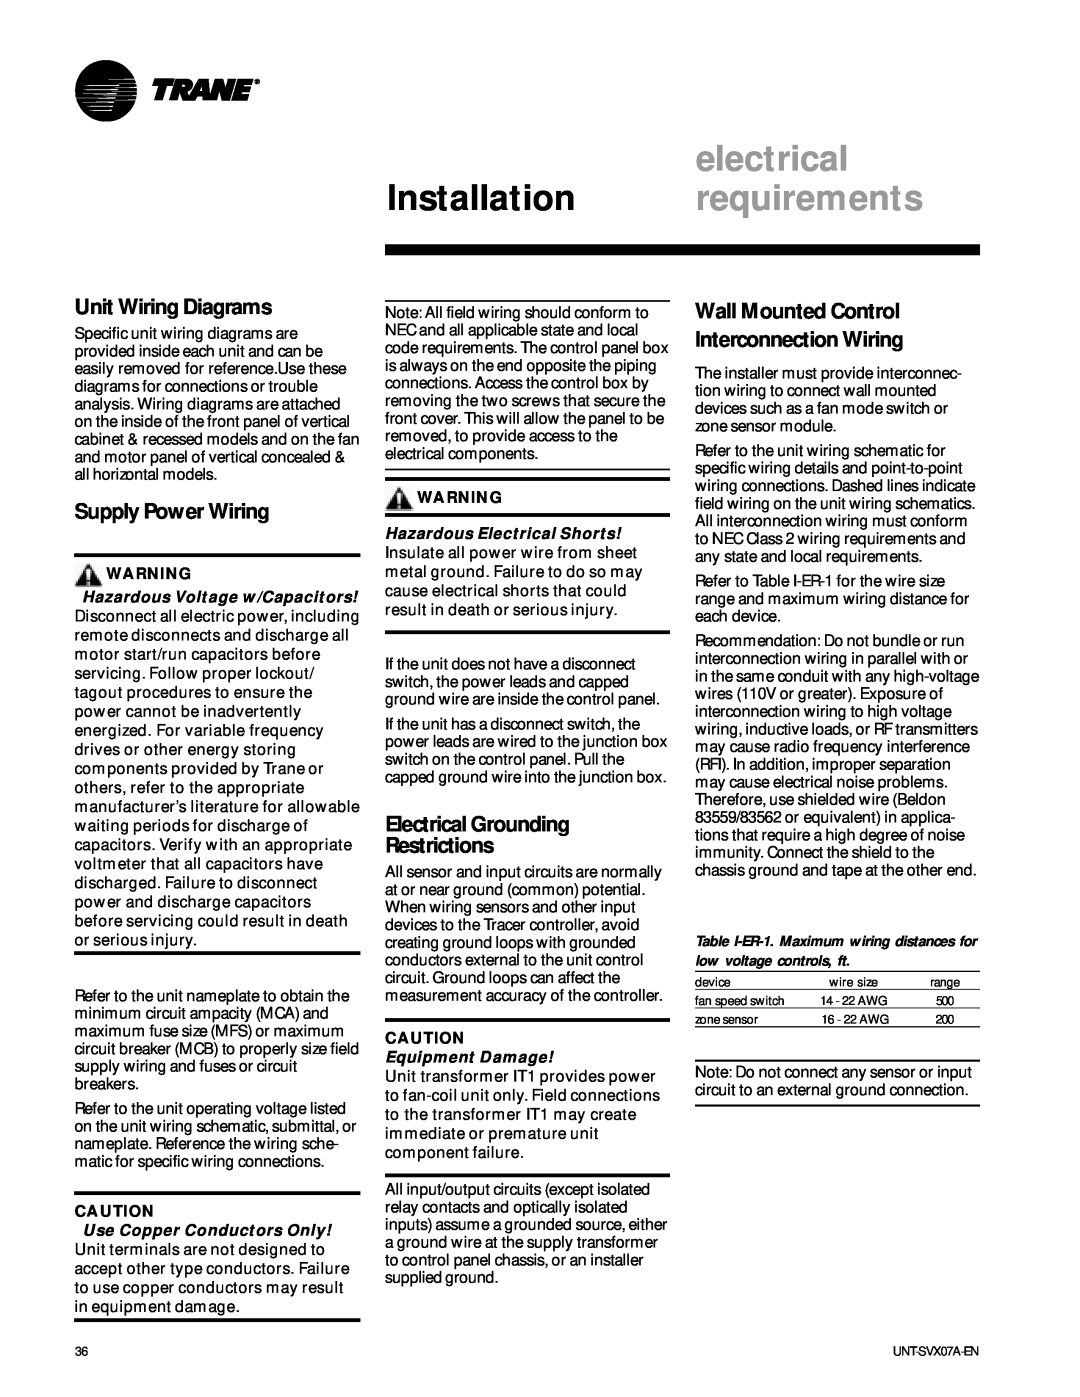 Trane UNT-SVX07A-EN manual electrical, Unit Wiring Diagrams, Supply Power Wiring, Electrical Grounding Restrictions 